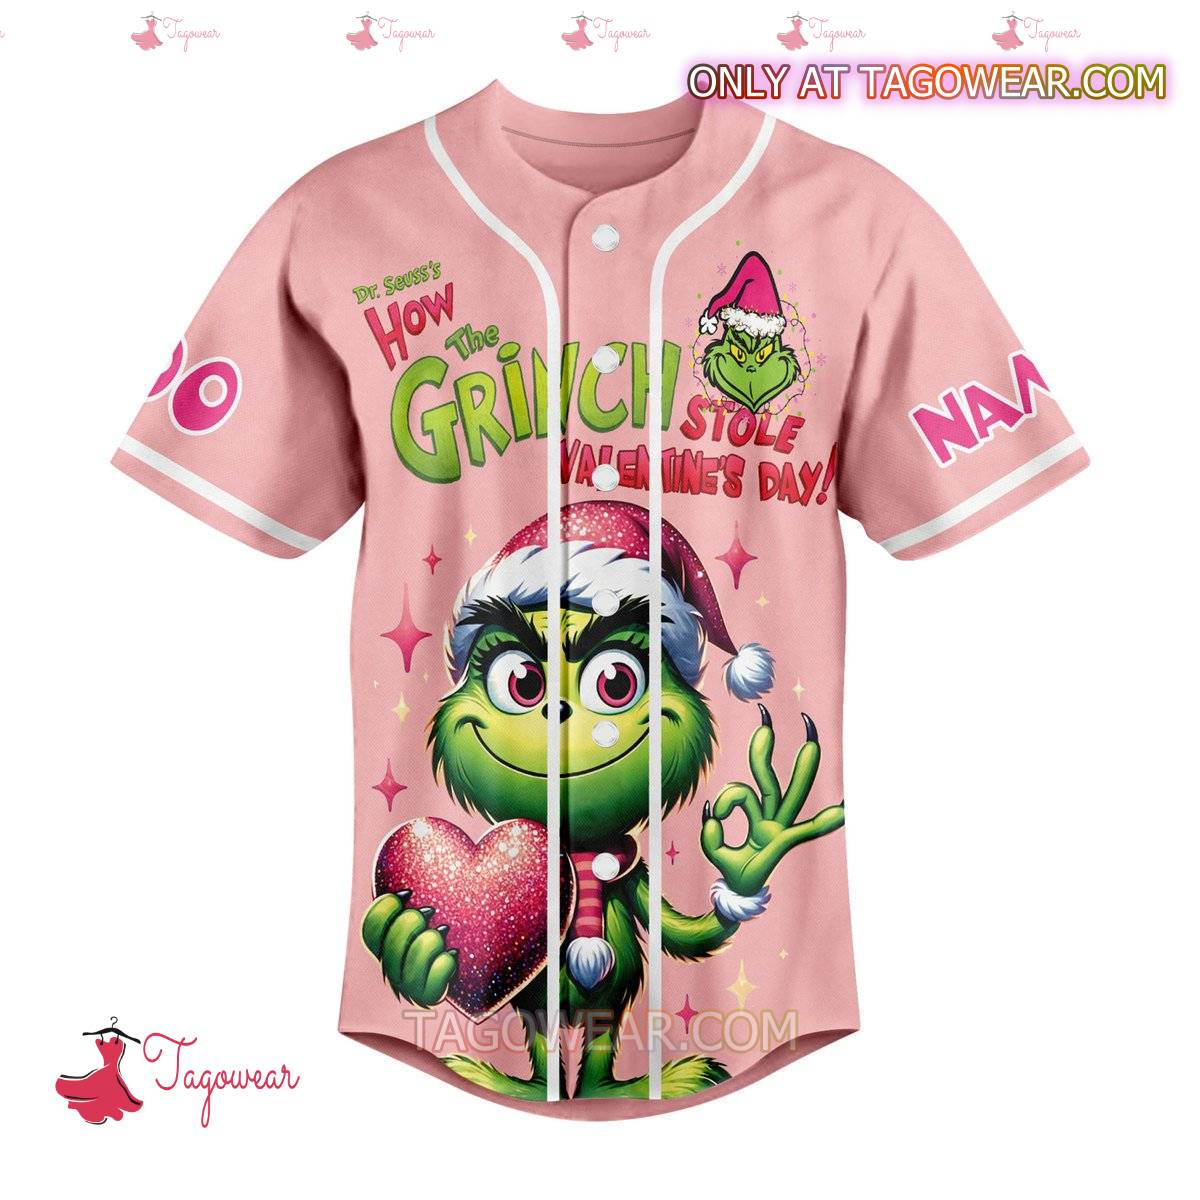 The Grinch Stole Valentine's Day Personalized Baseball Jersey b